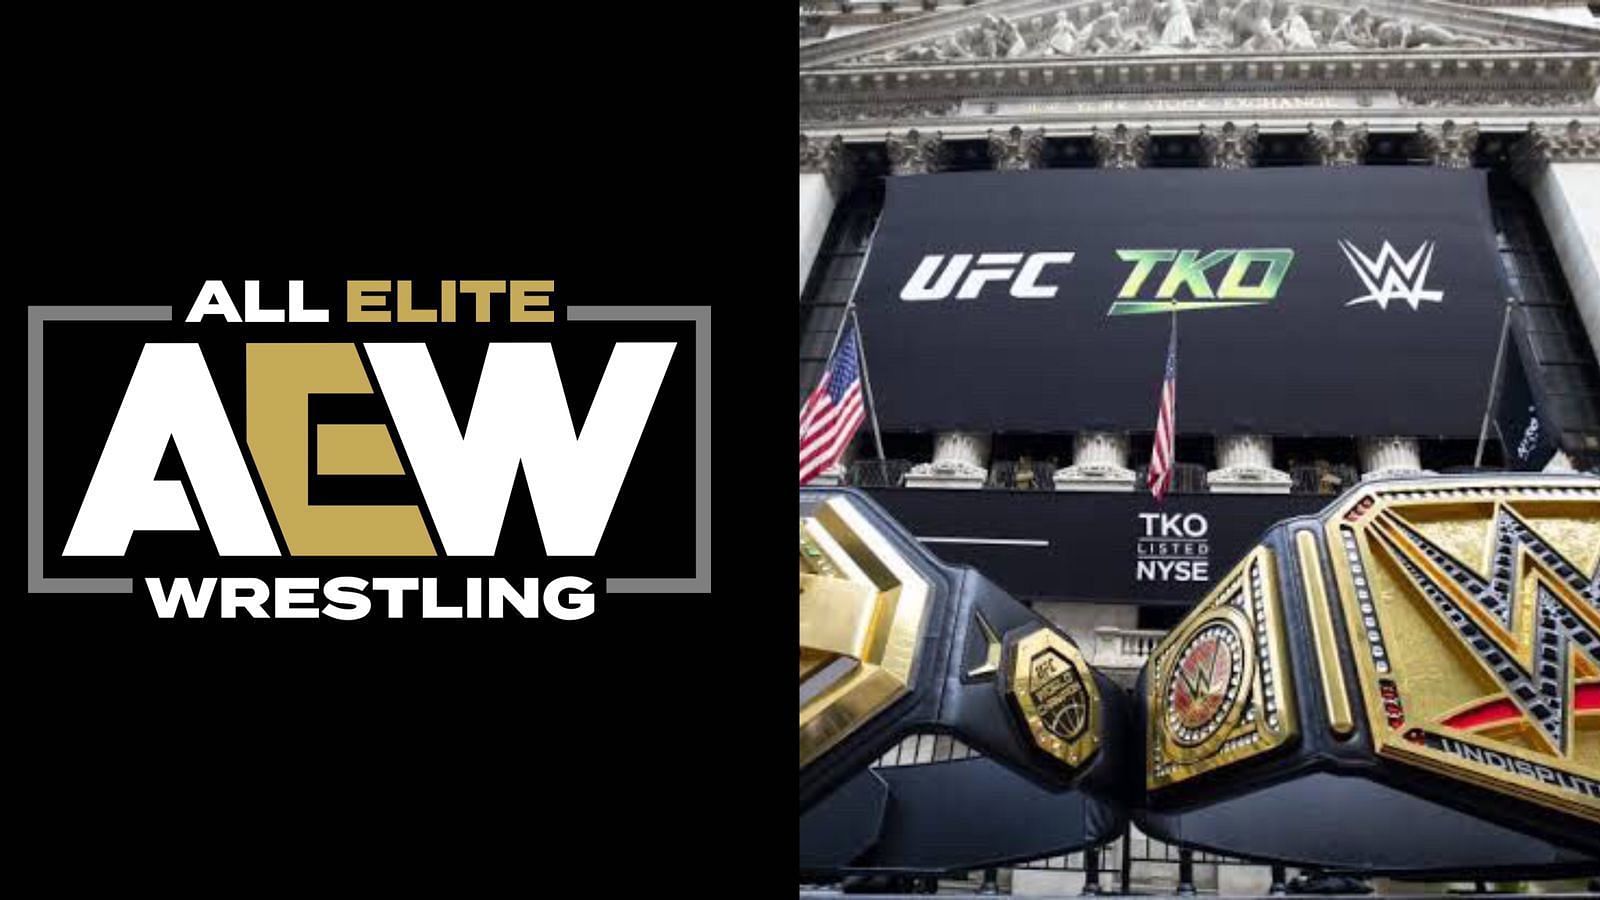 AEW veteran suggests employees to jump ship after WWE UFC merger